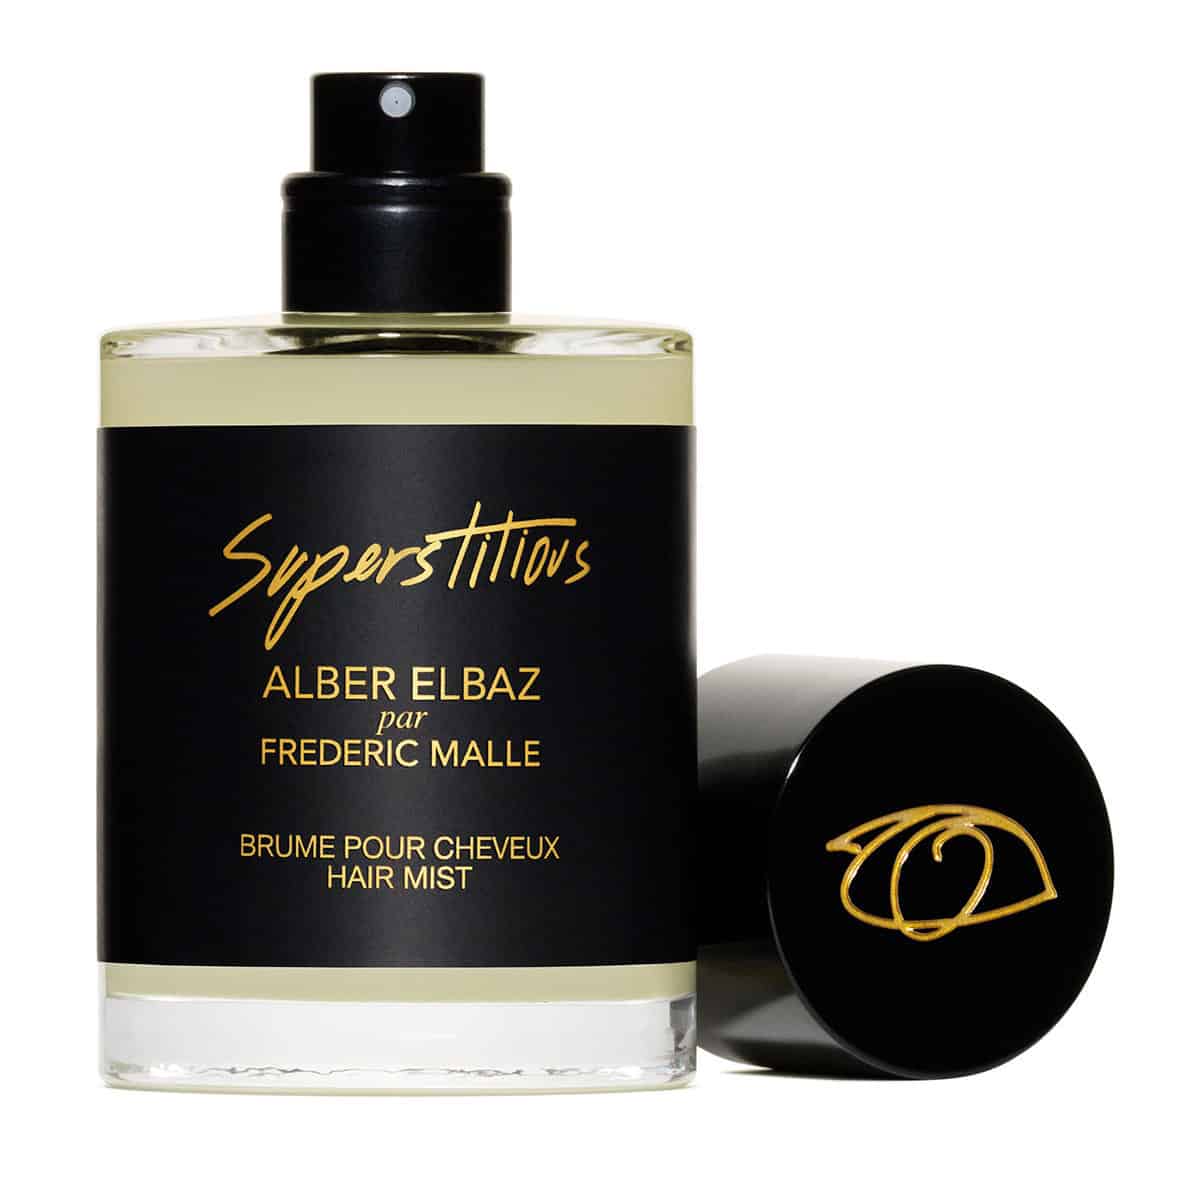 Superstitious Hair Mist by Frederic Malle